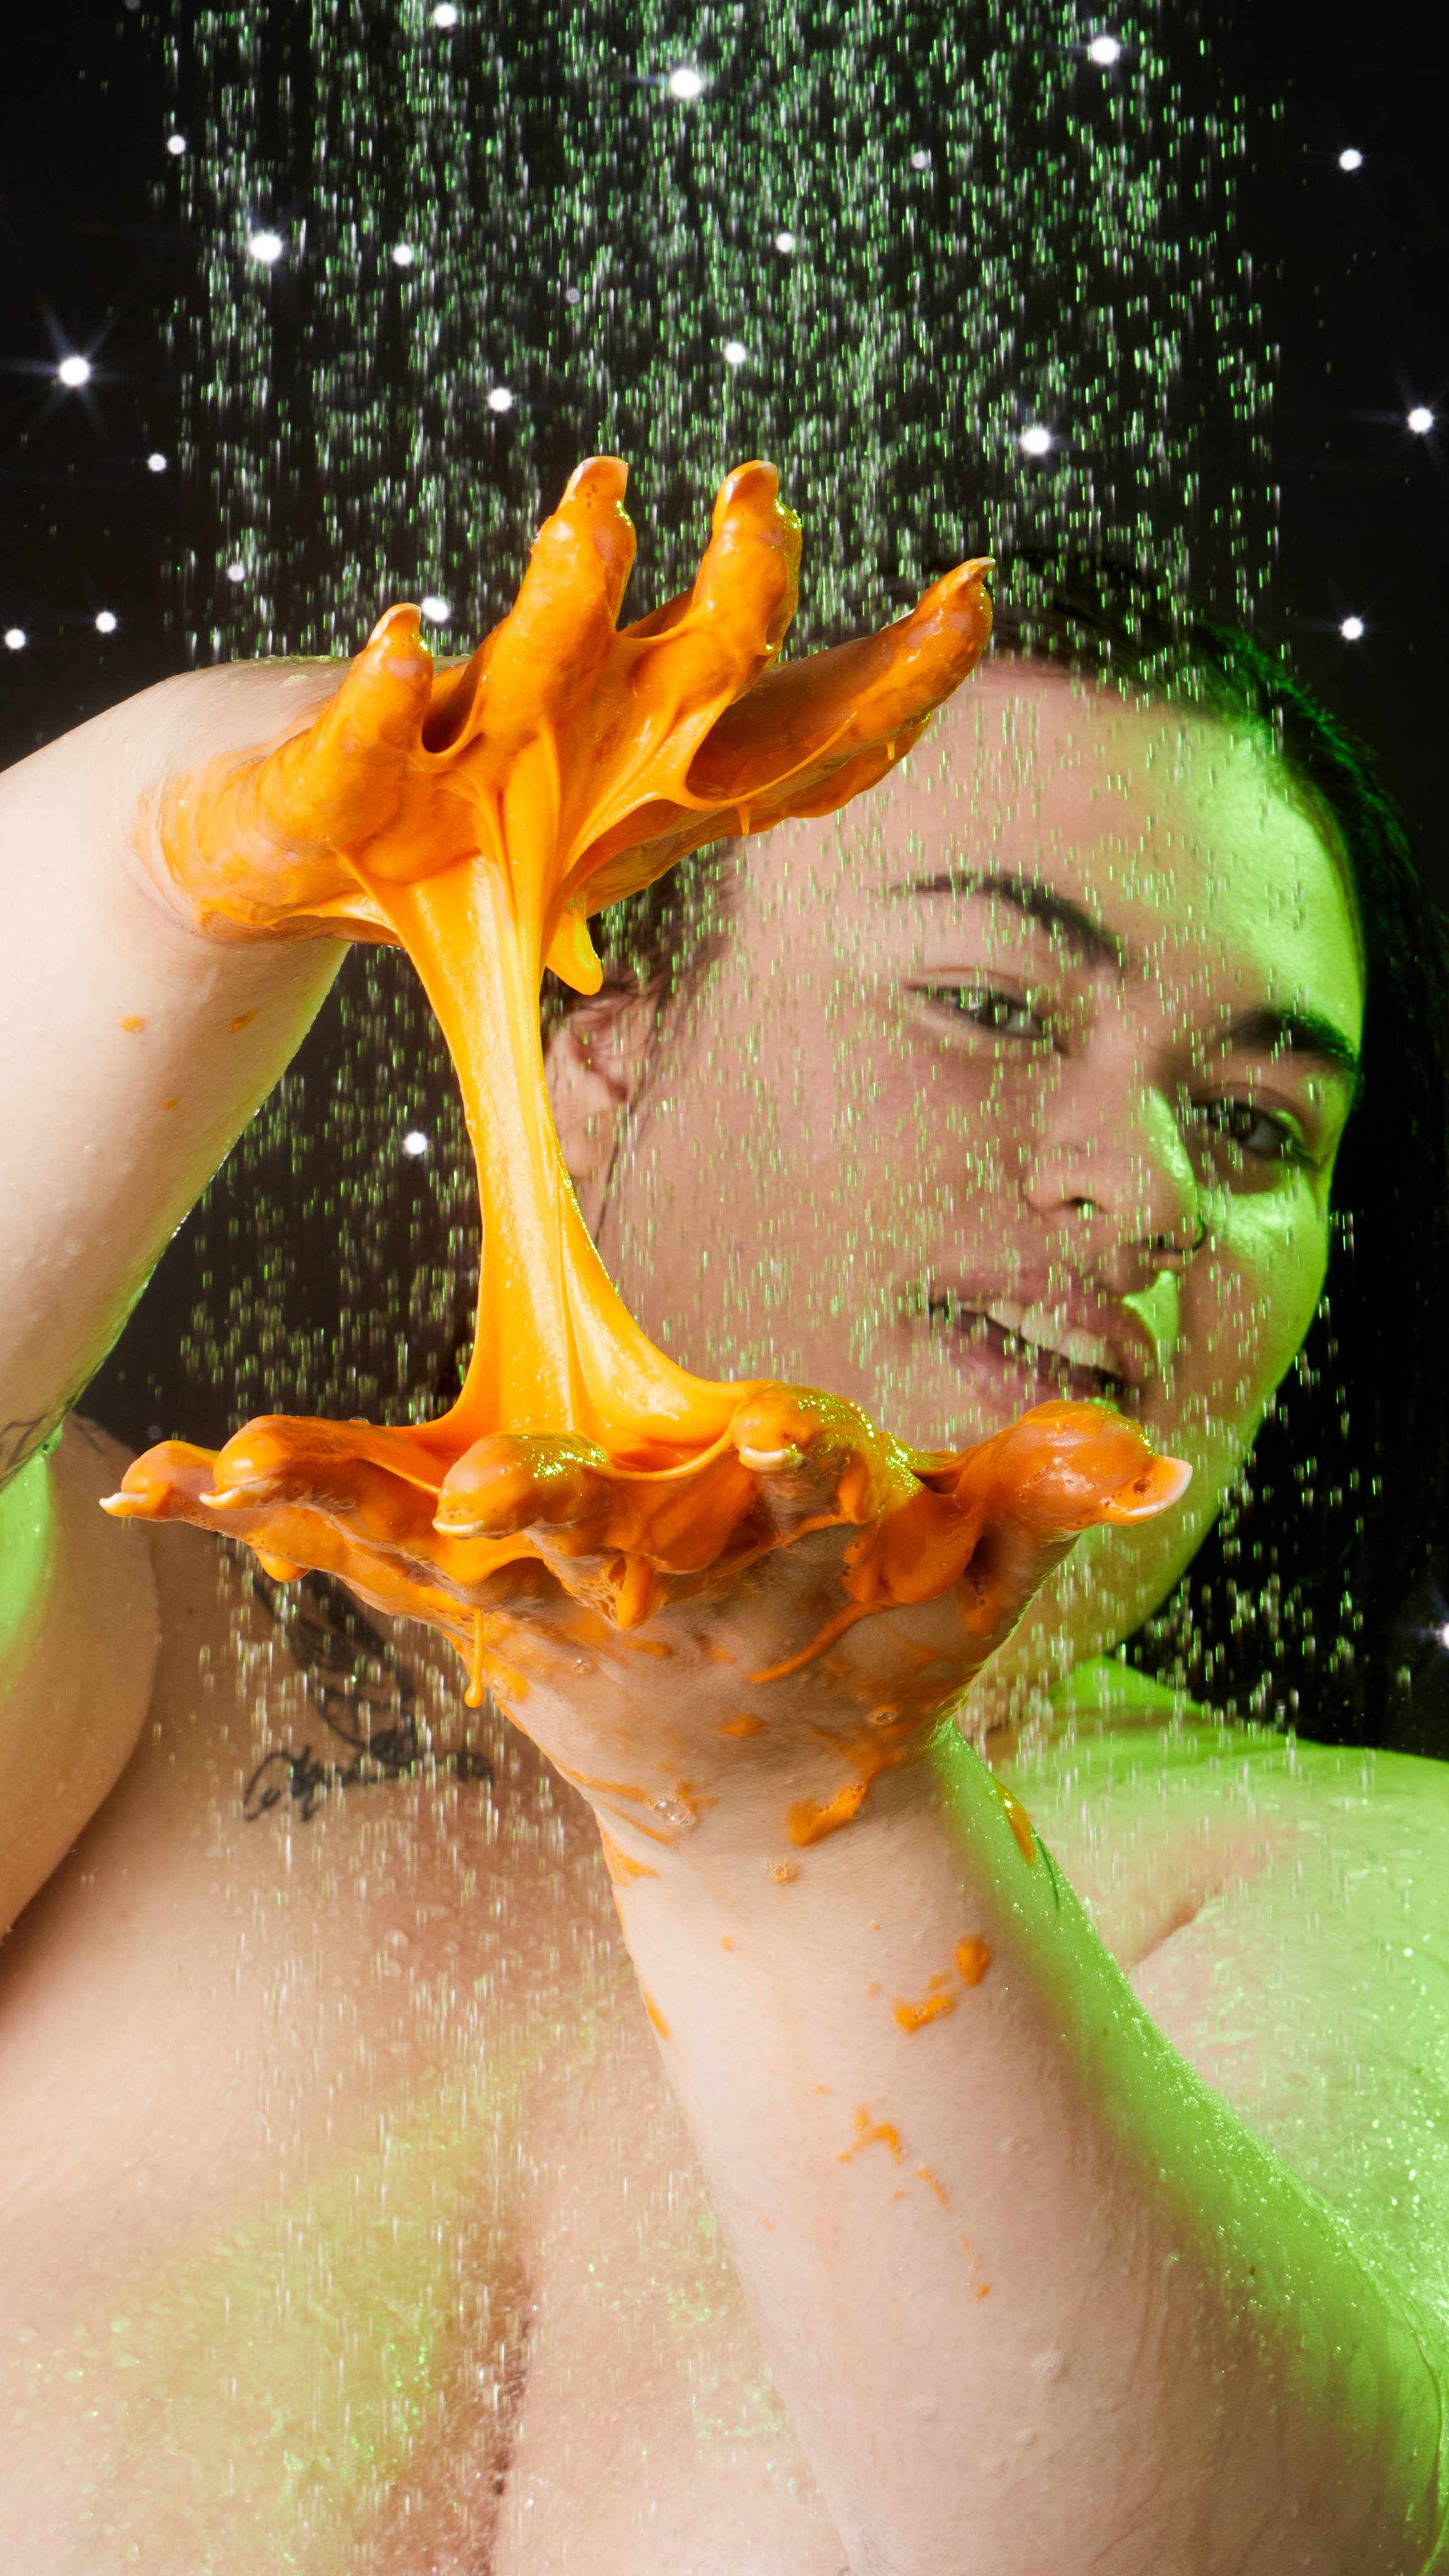 A close-up image of the model's hands as they are in the shower. They are separating and stretching the gooey slime apart.